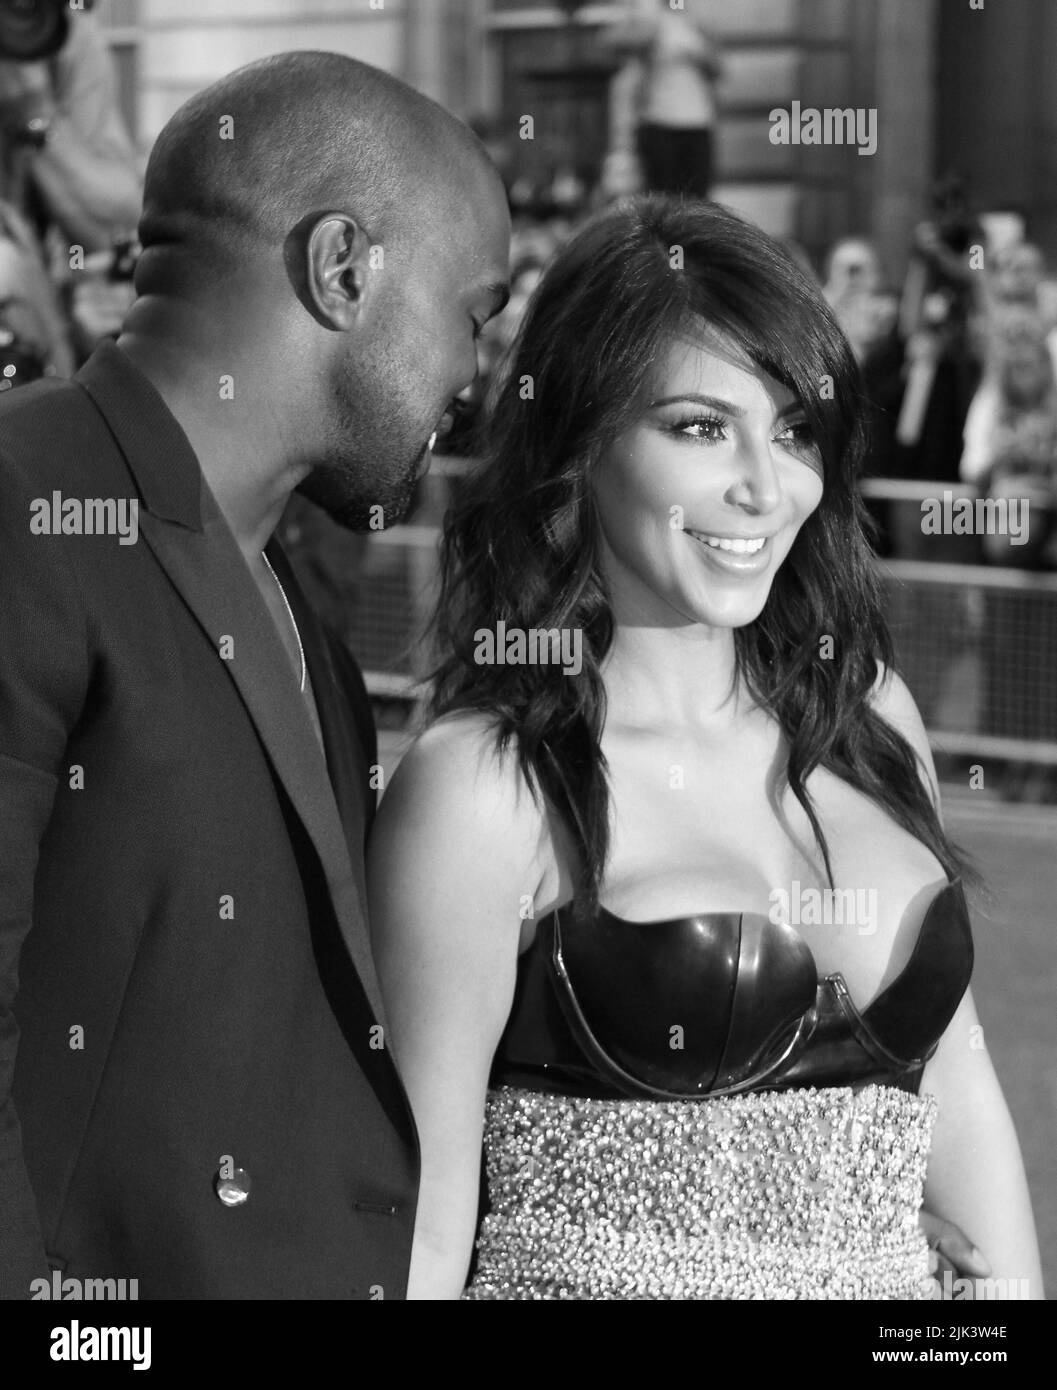 London, UK, 2nd September 2014: Kim Kardashian and Kanye West attend the GQ Men of the Year awards at The Royal Opera House in London, UK. Stock Photo